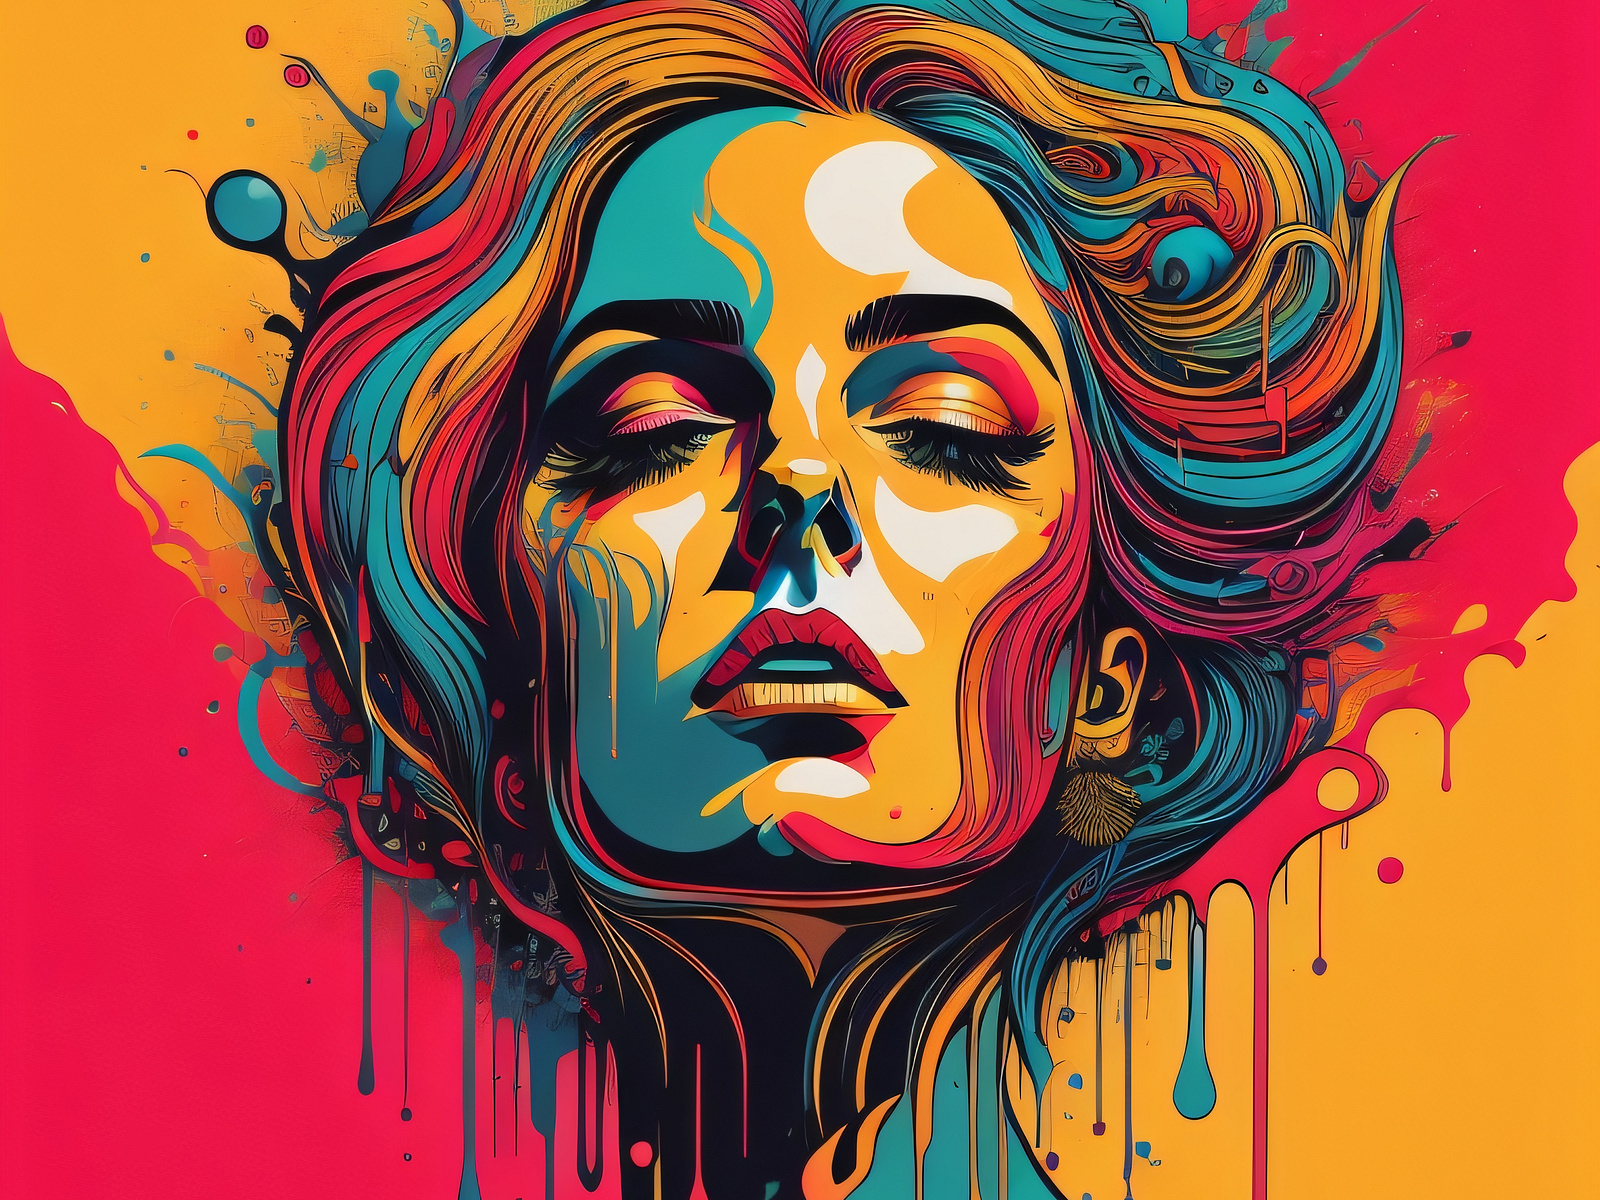 Girl's Face in an Abstract Art by FaseehUdeen on Dribbble